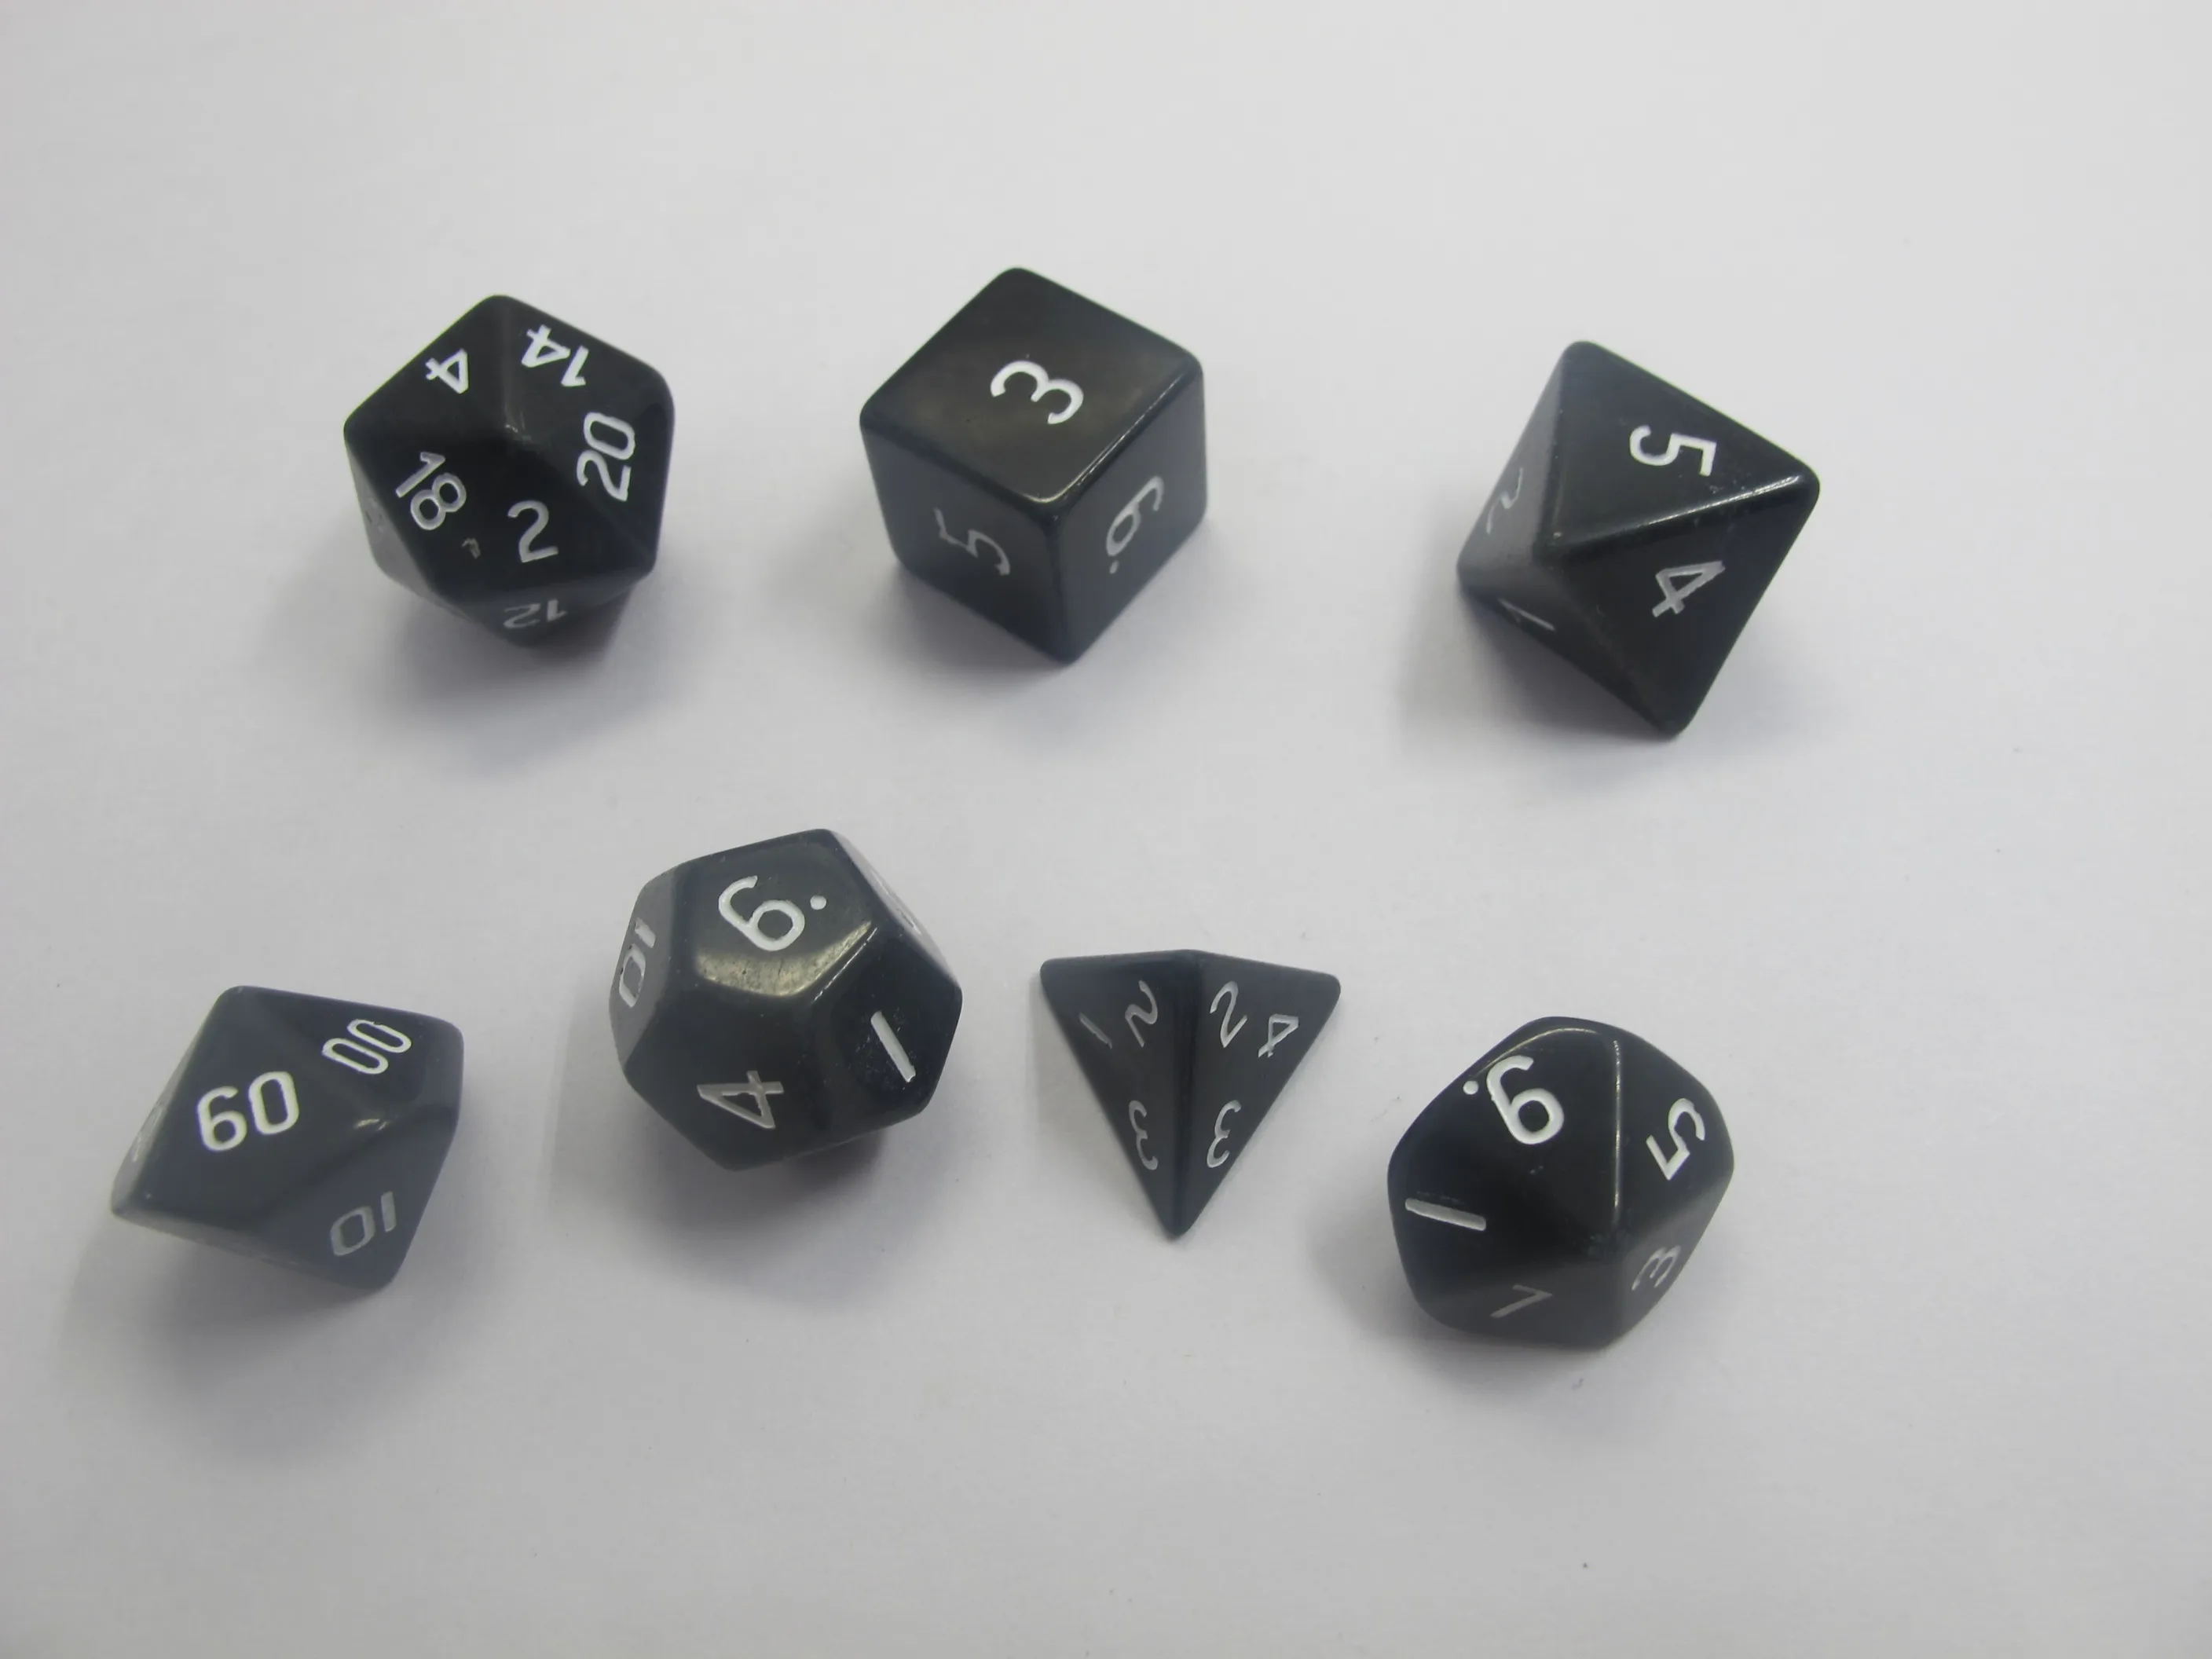 Dice 6 For Black Game Dice Dungeons Dice Polyhedral New 1pcs Skull Sided 